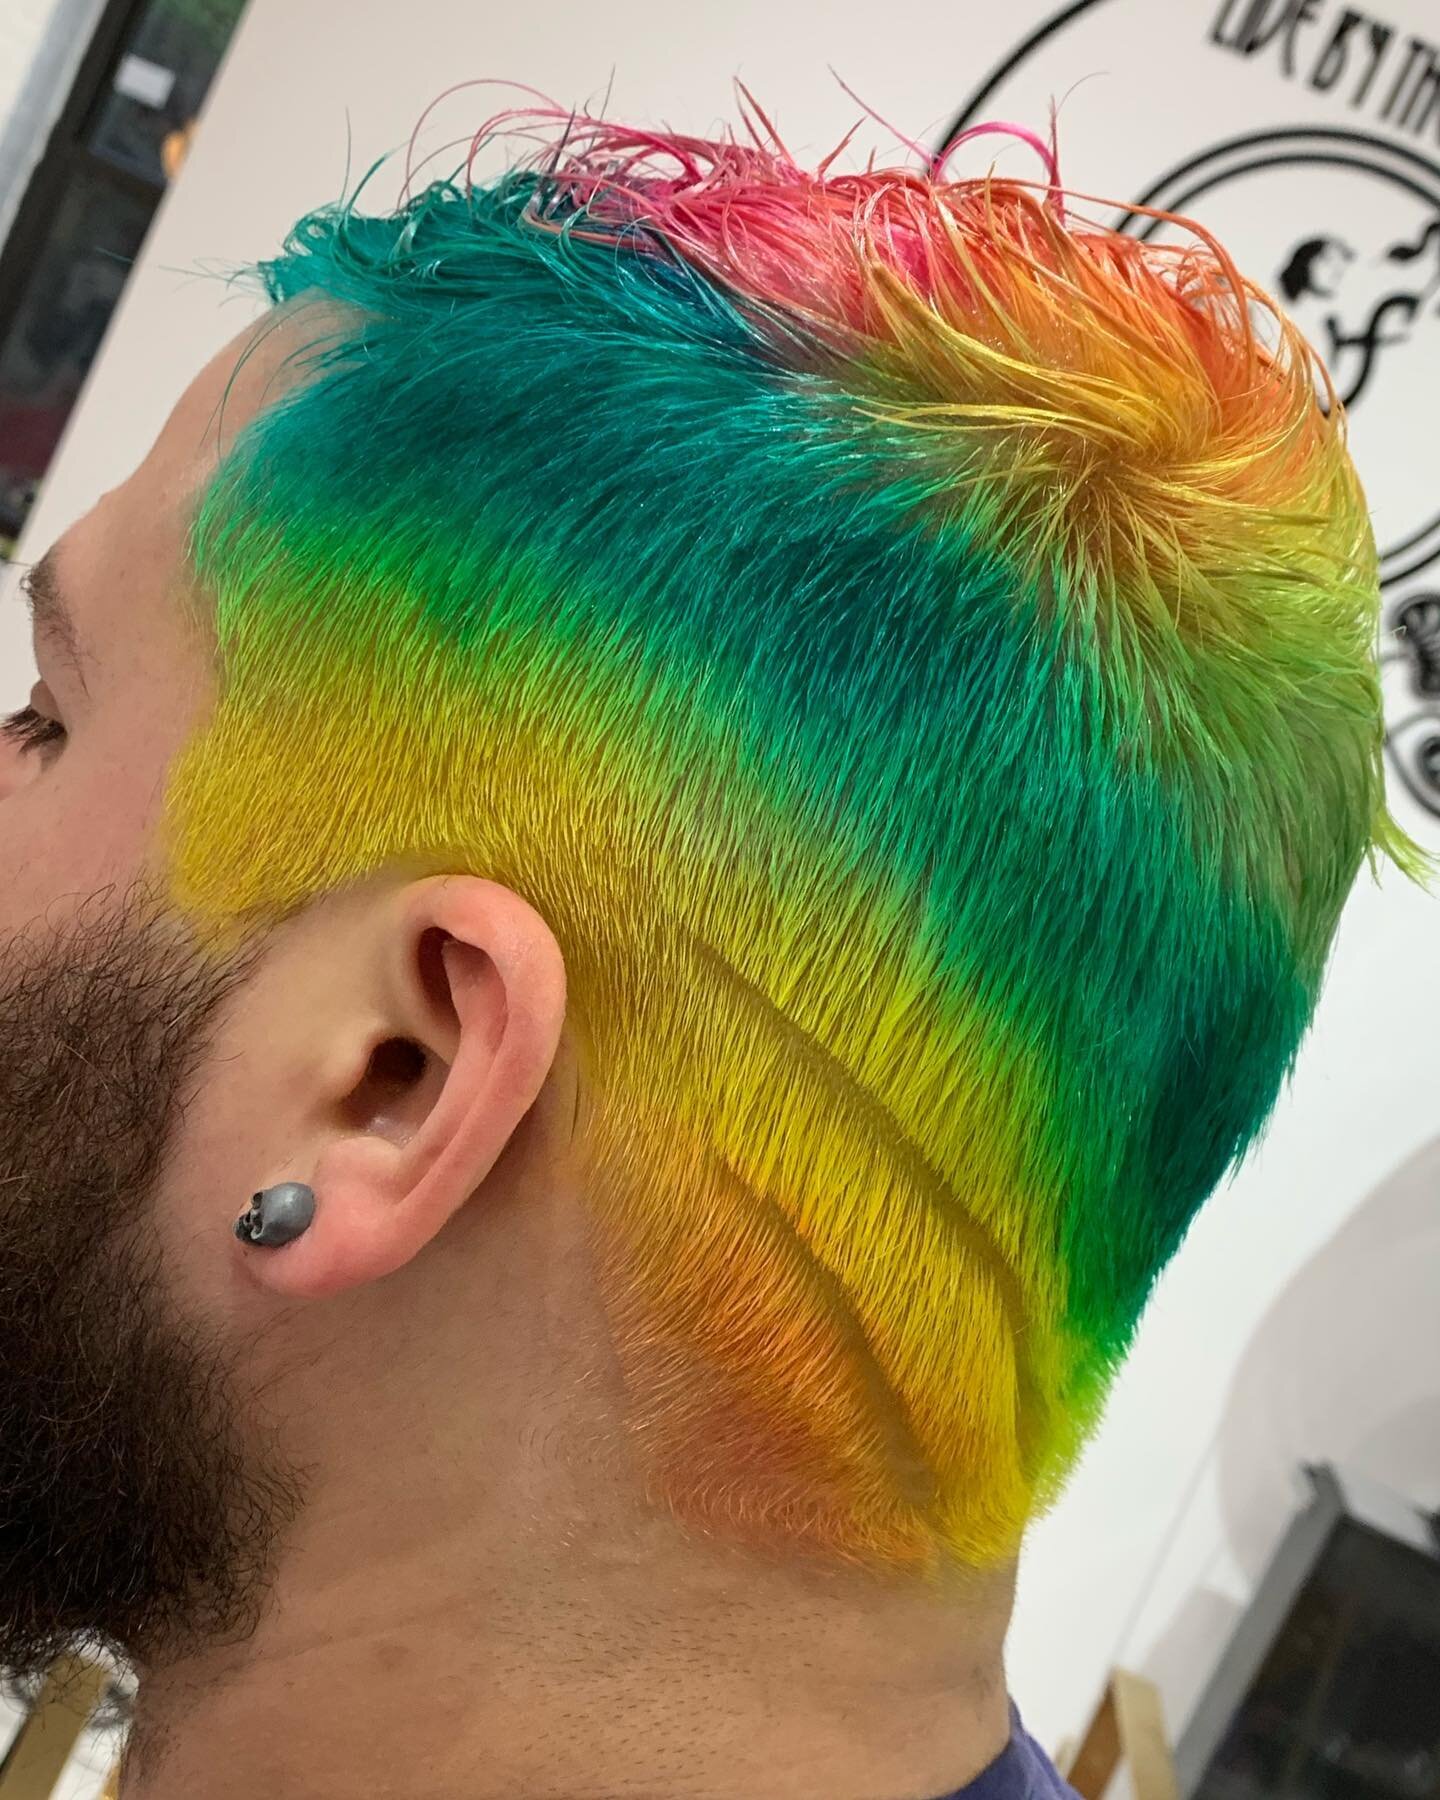 Rainbow hair 🌈 don&rsquo;t care 😎 short hair, long hair, balayage, color corrections, fantasy hair - we do it all. Whatever your hair color needs are, we got you covered 🎨